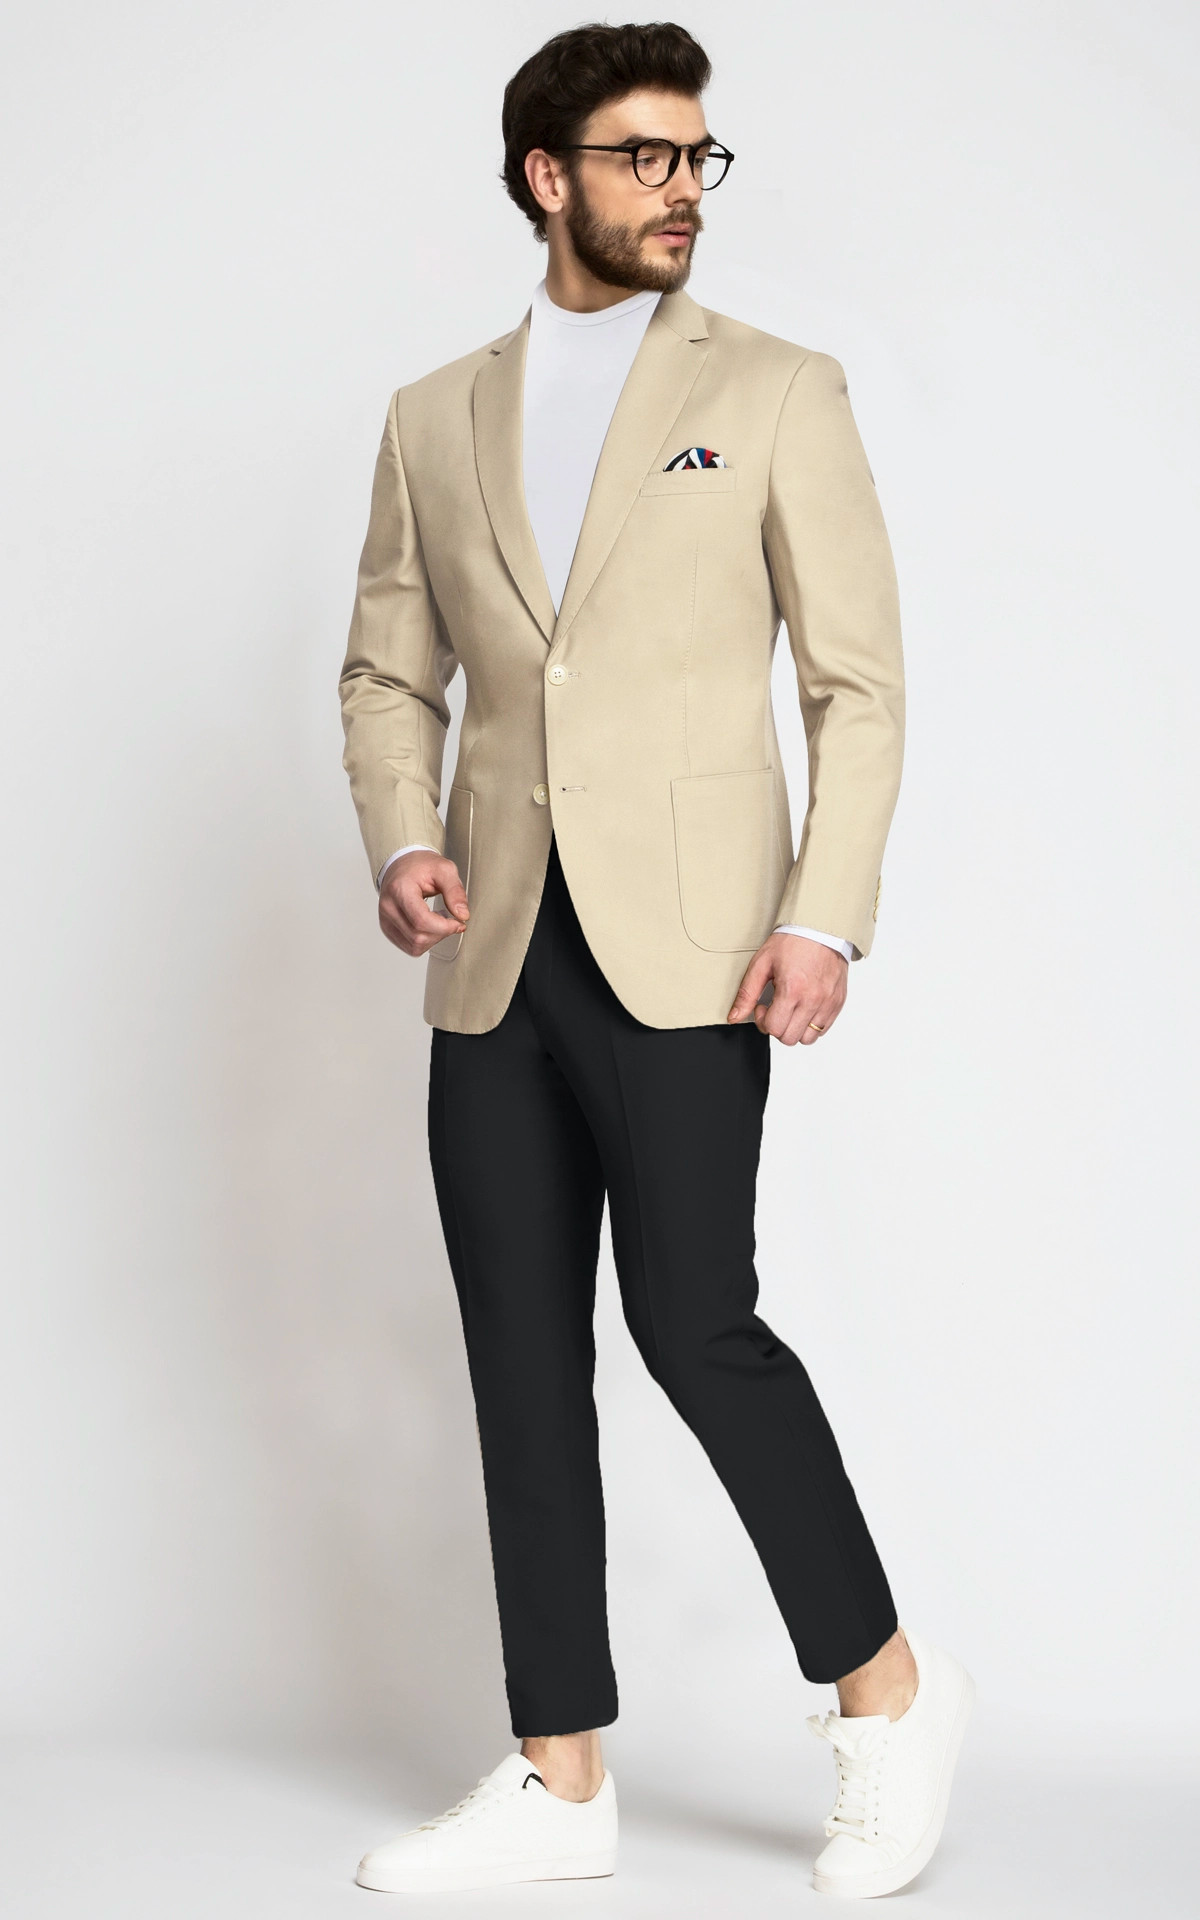 Big and Tall Suits for Men | Plus Size & Large | Suit Direct